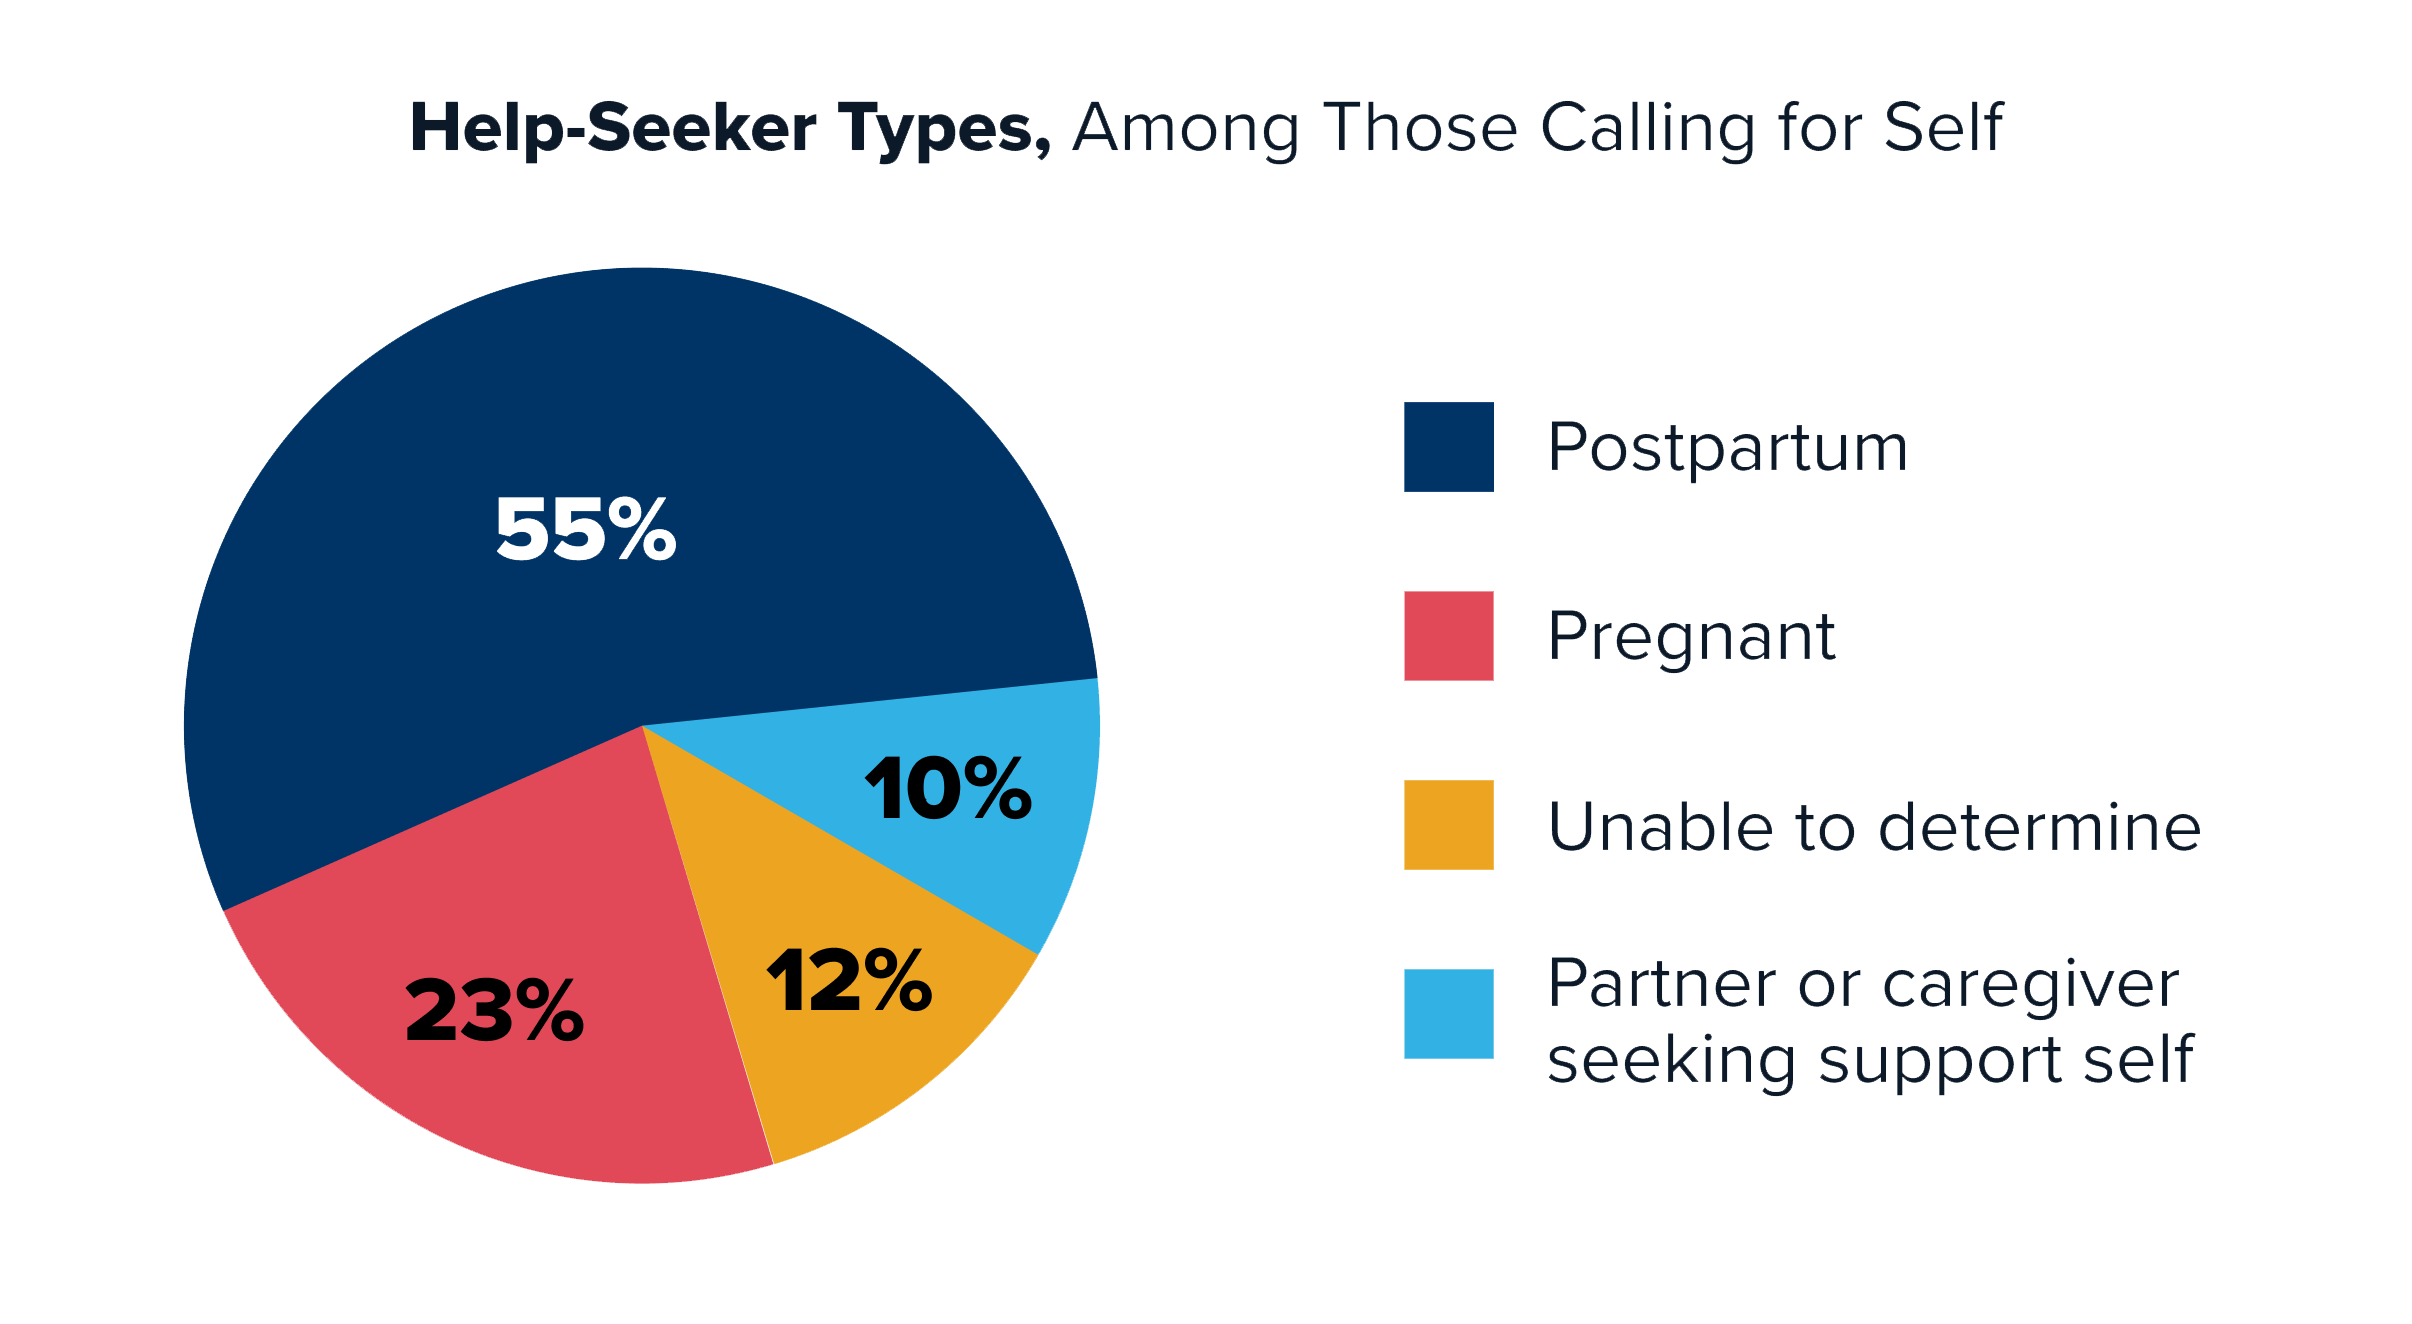 A pie chart showing the different types of help that callers were seeking when contacting the National Maternal Health Hotline.